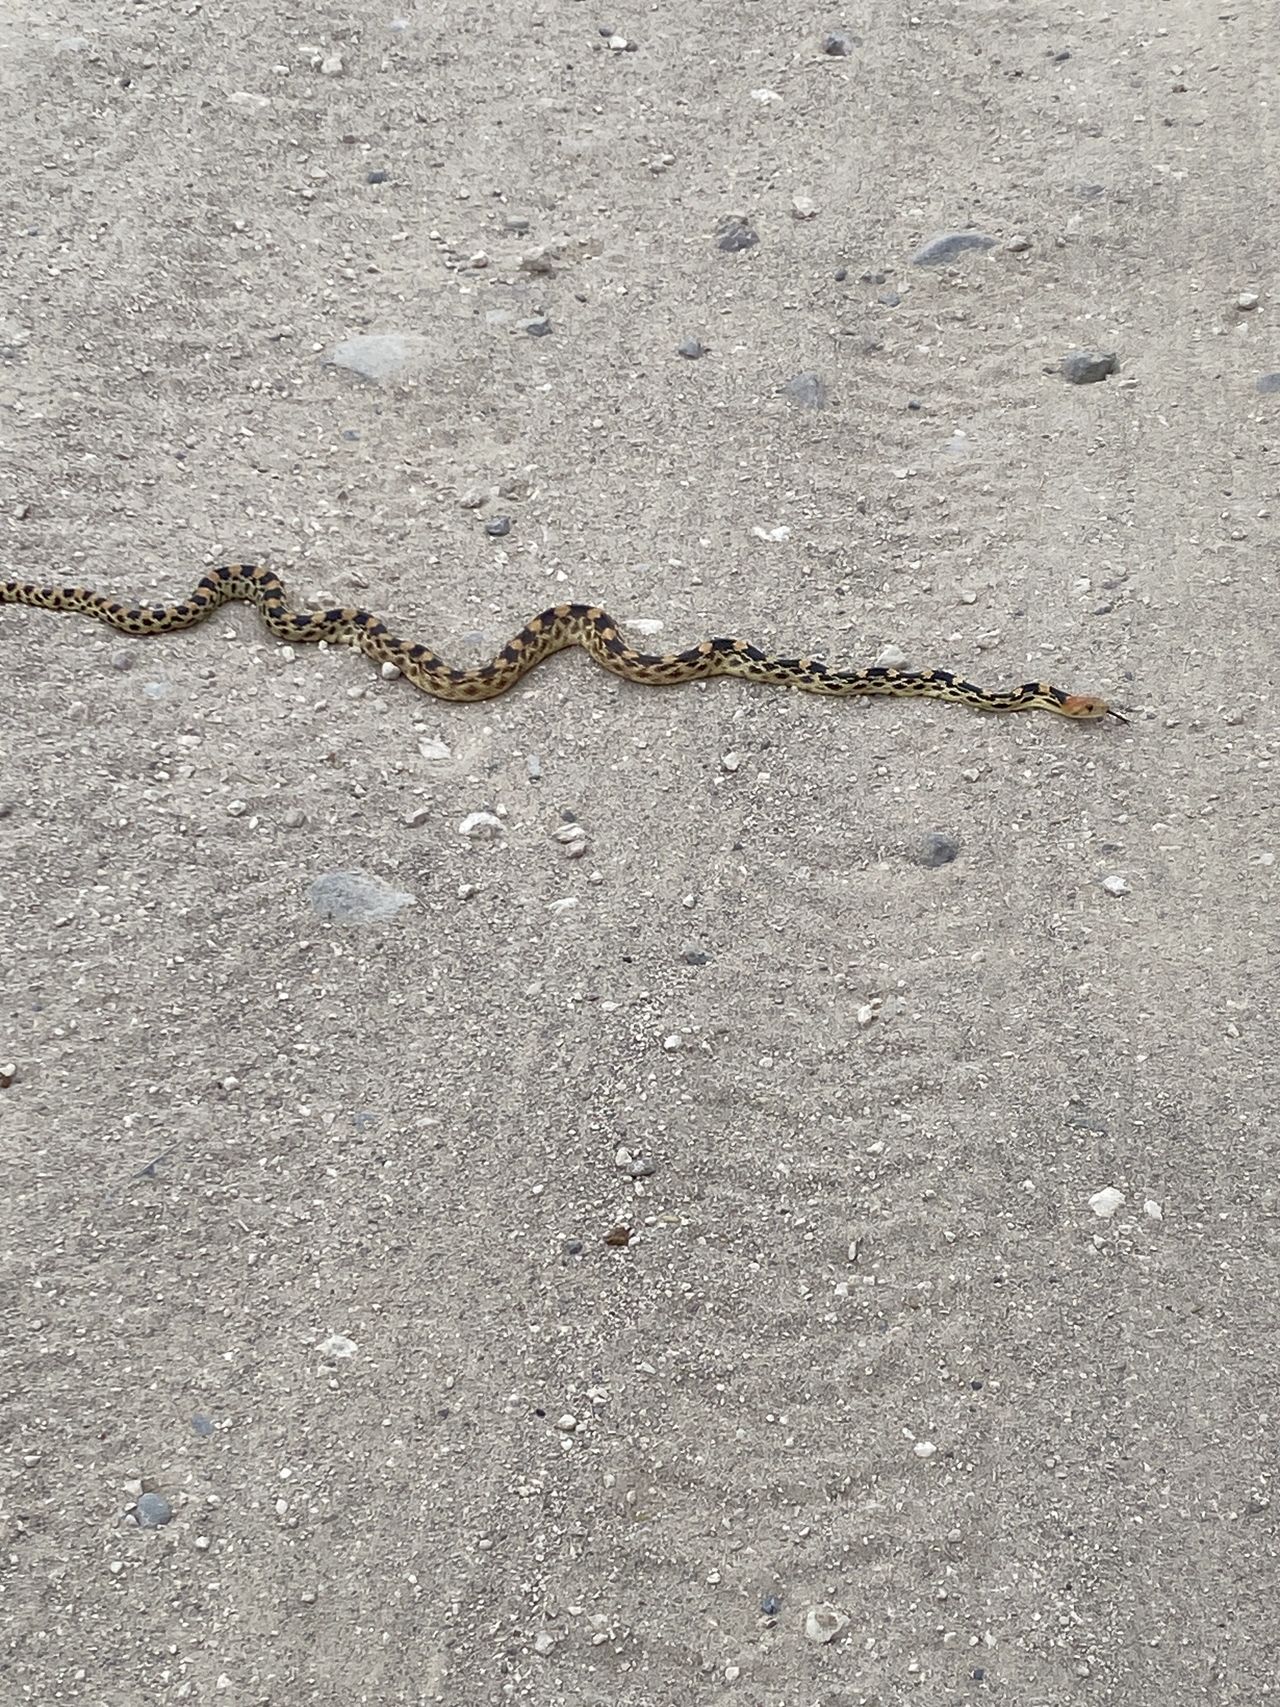 Baja gopher snake.  Not as big and scary as the rattlesnakes!  Photo courtesy of Rebecca.